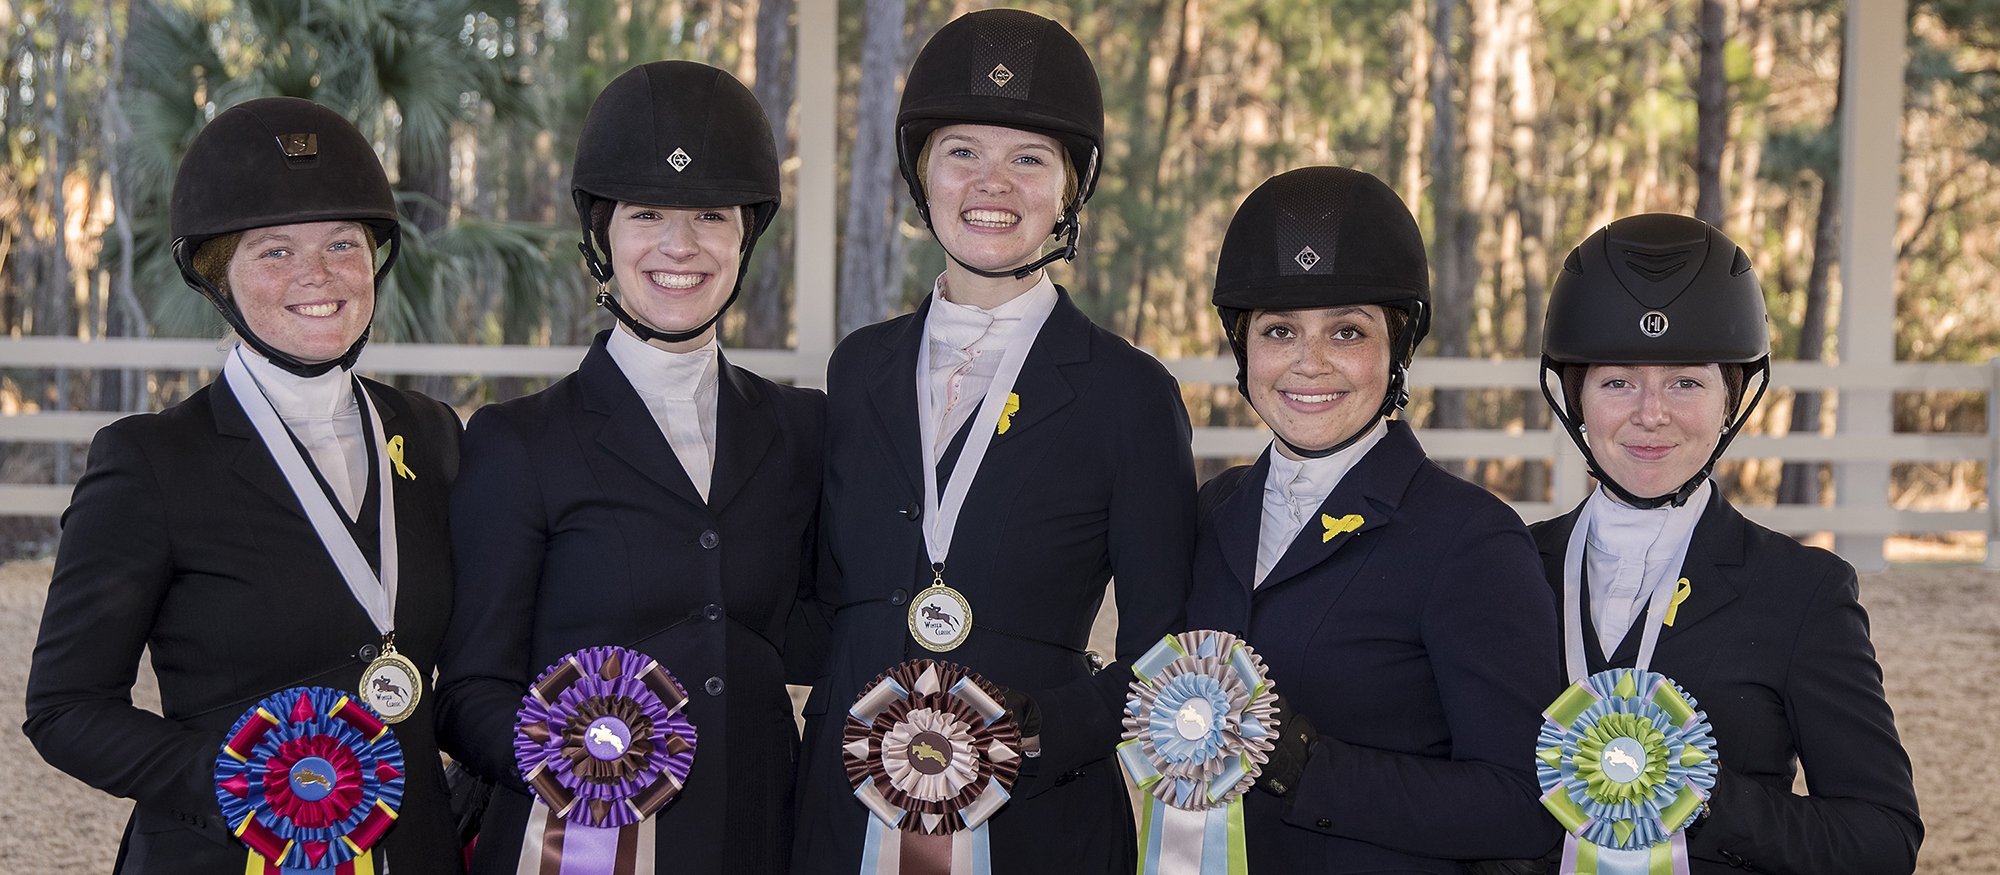 Riding Resumes Competition at the Winter Tournament of Champions in South Carolina